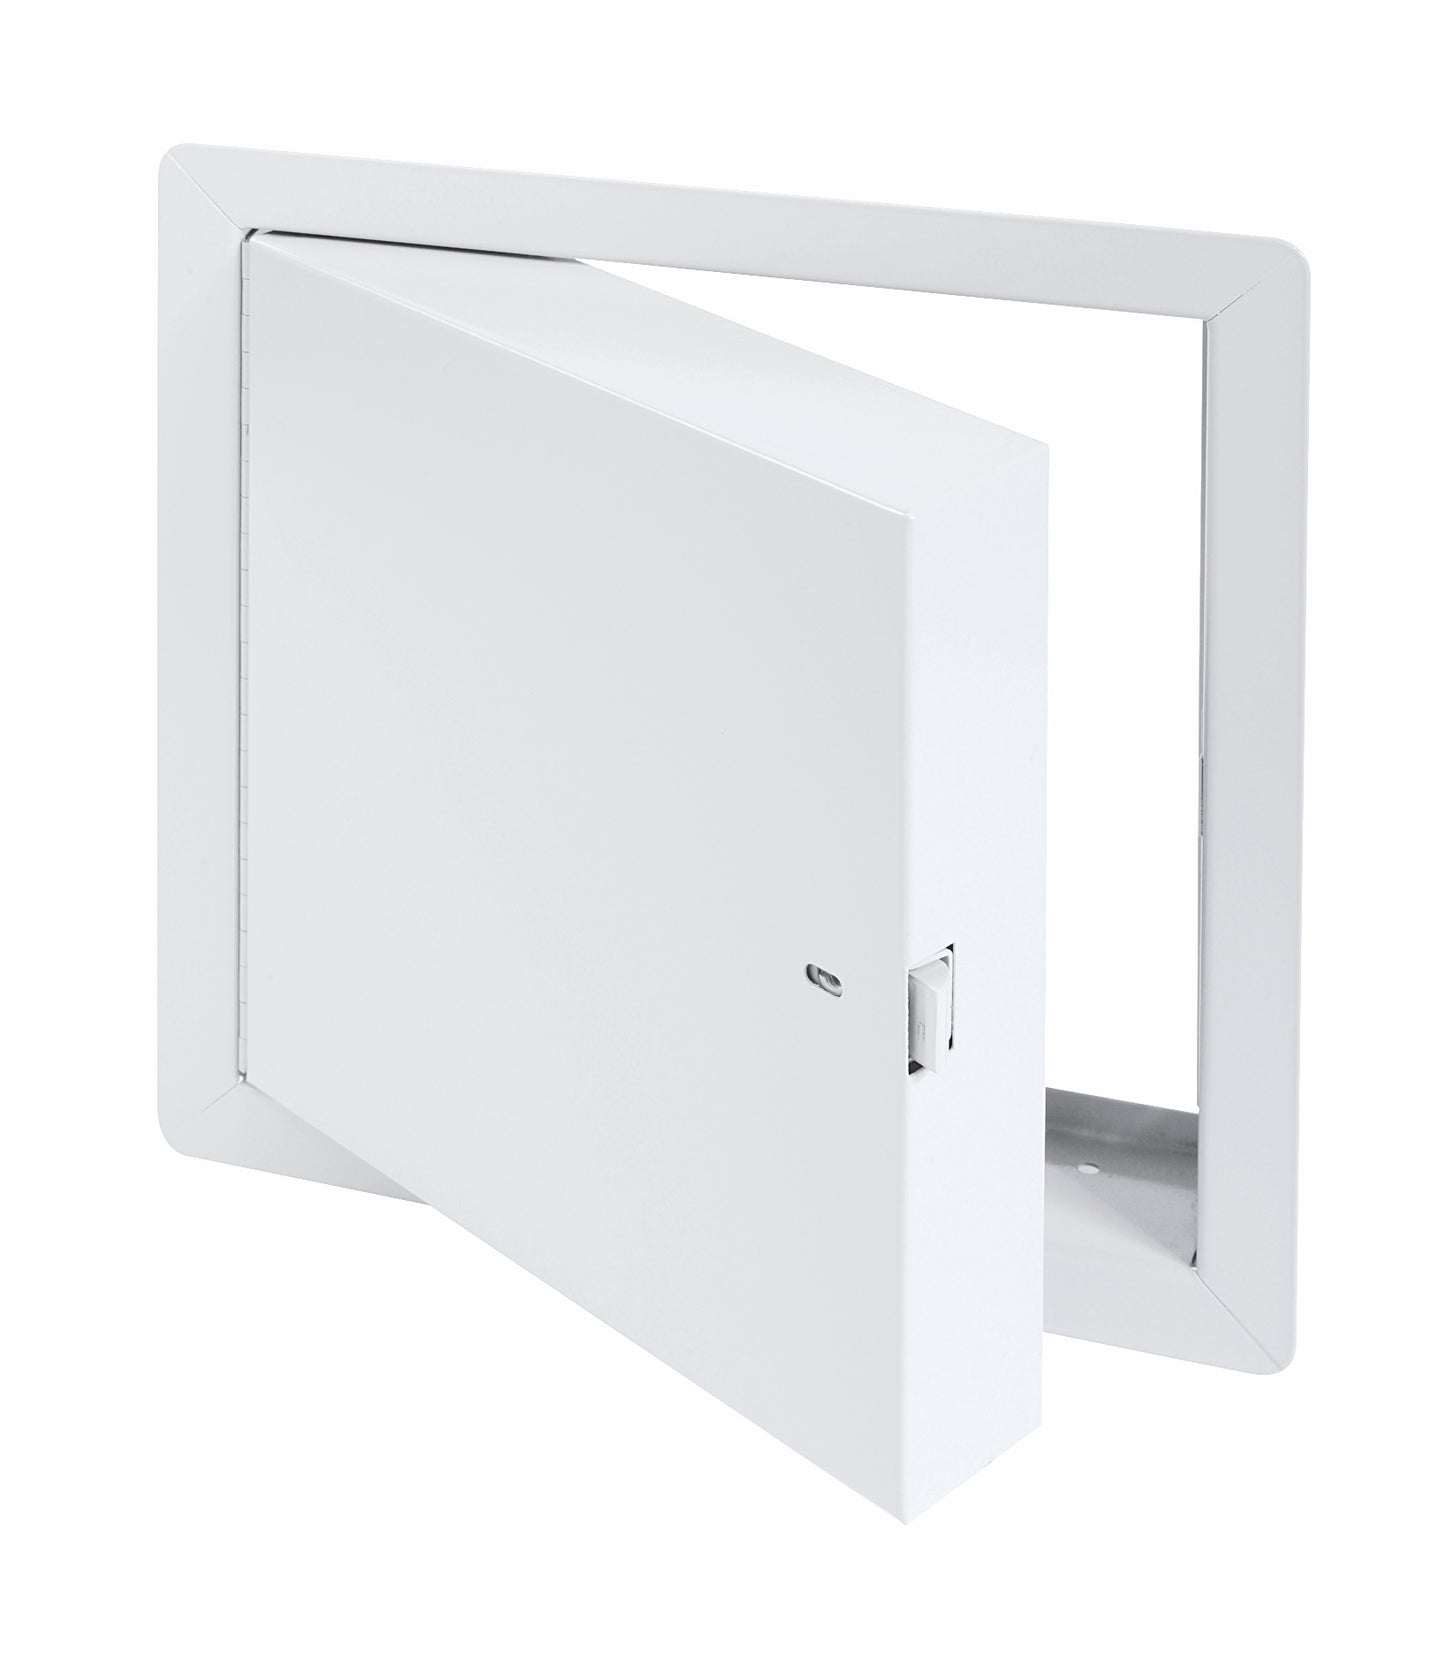 48"x48" Fire-rated Insulated Access Door with Exposed Flange, Cendrex